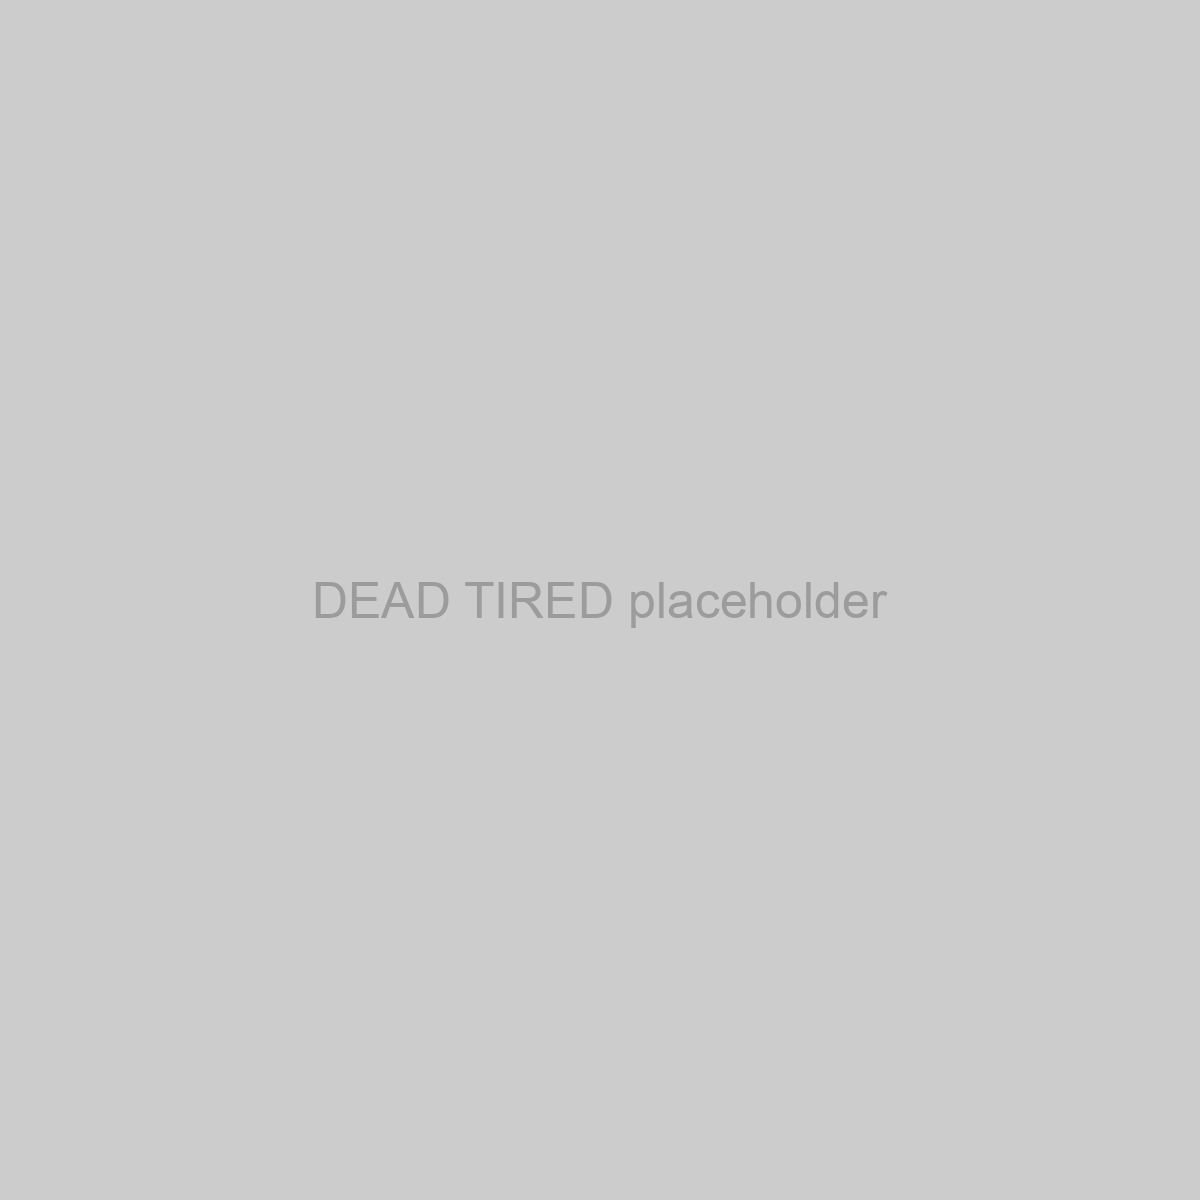 DEAD TIRED Placeholder Image